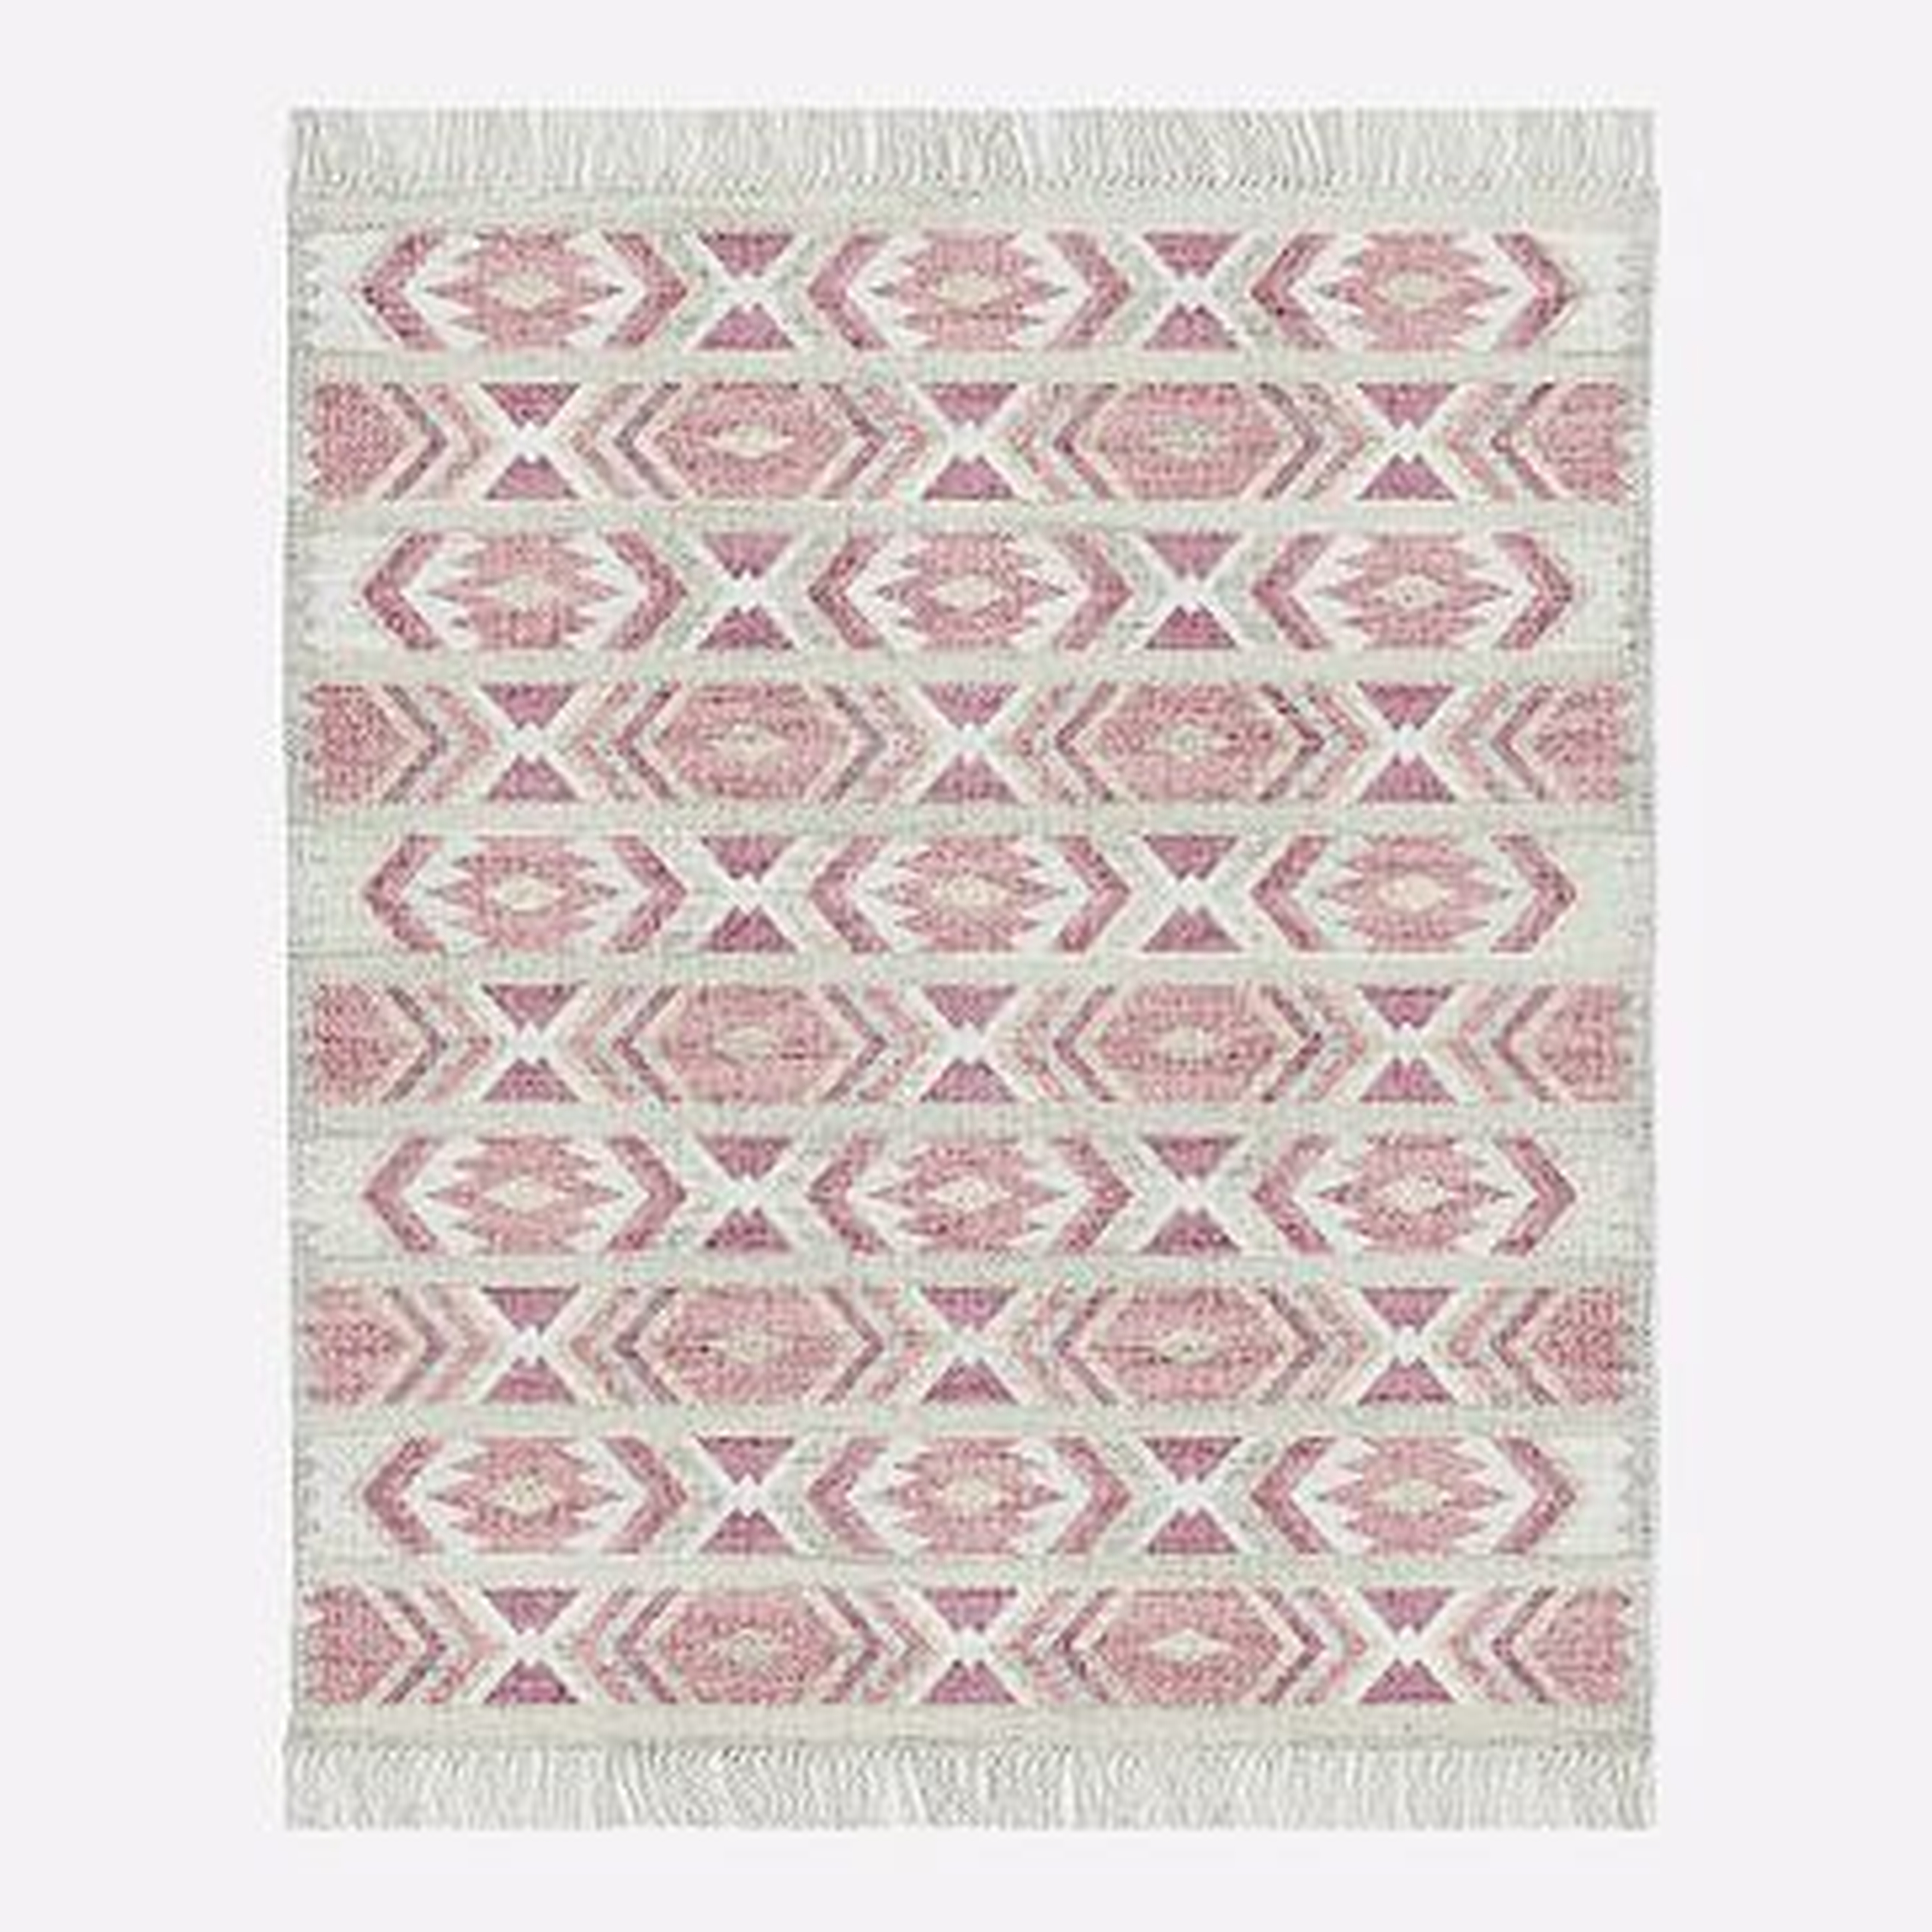 MTO Campo Rug, Macaroon Pink, 9x12 - West Elm